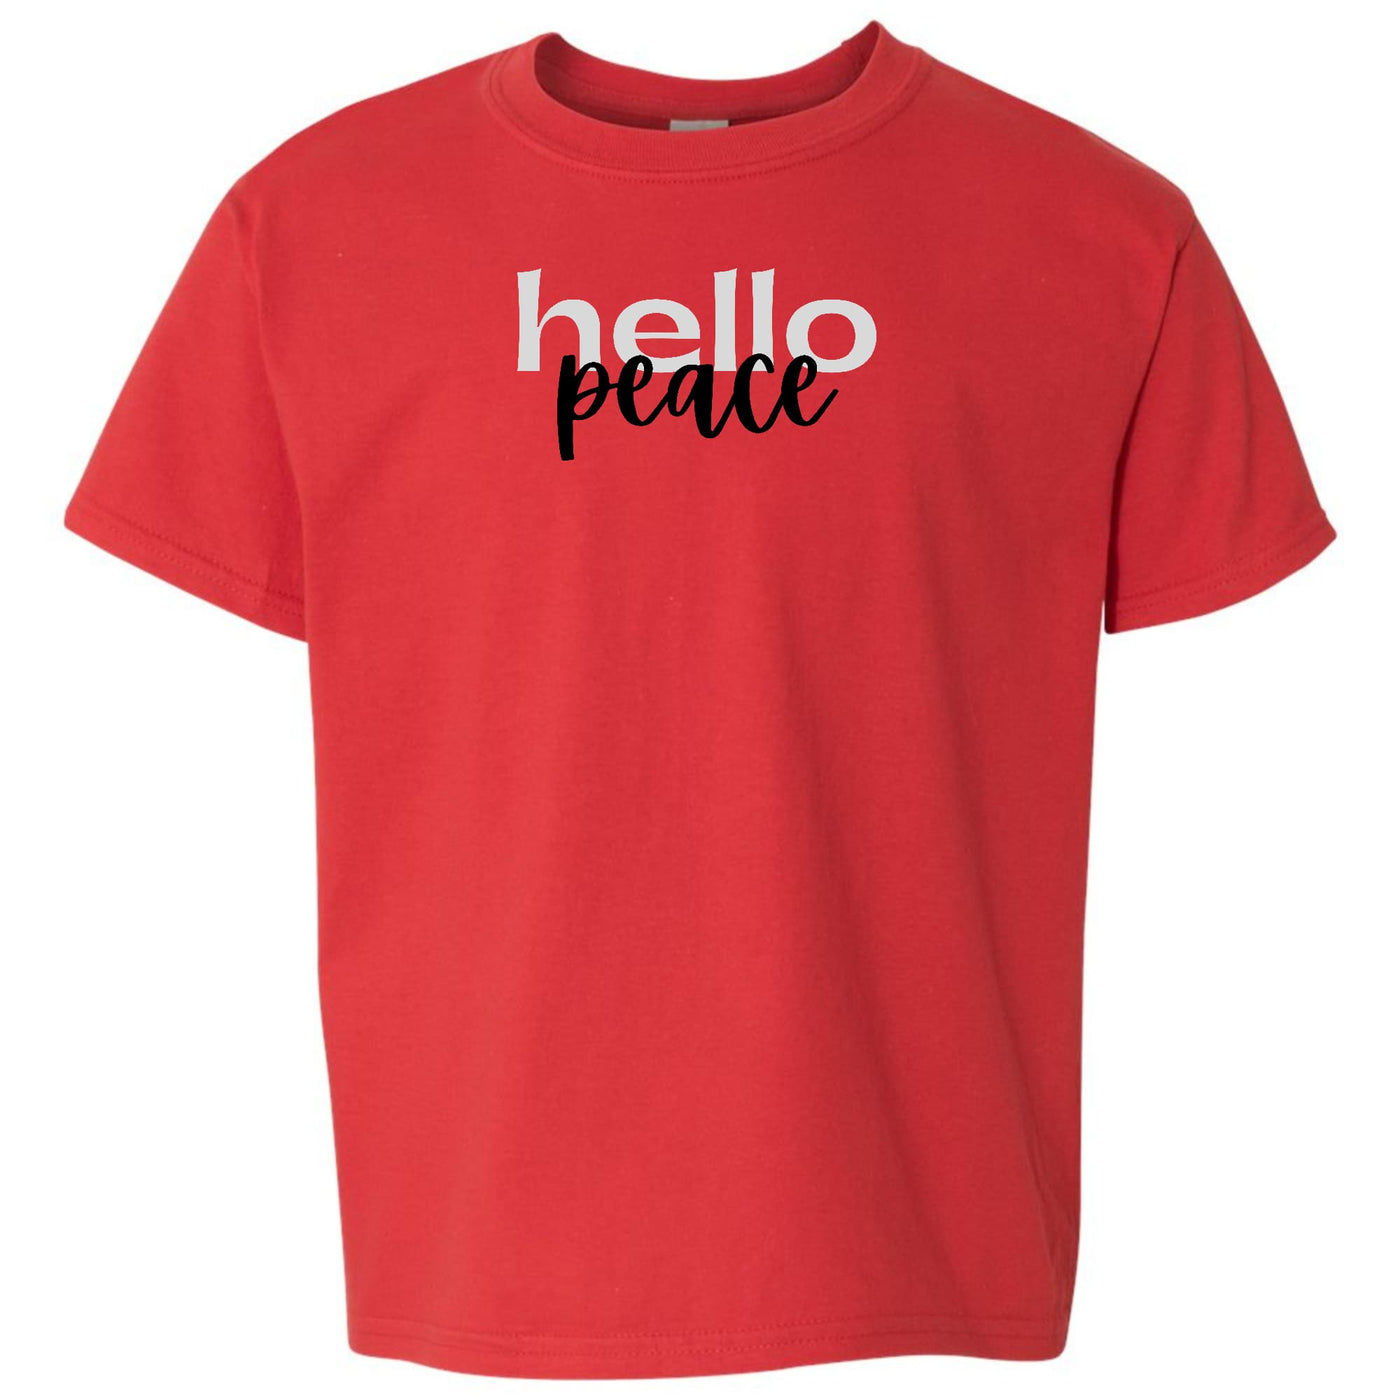 Youth Graphic T-shirt Hello Peace Motivational Peaceful Aspiration - Youth